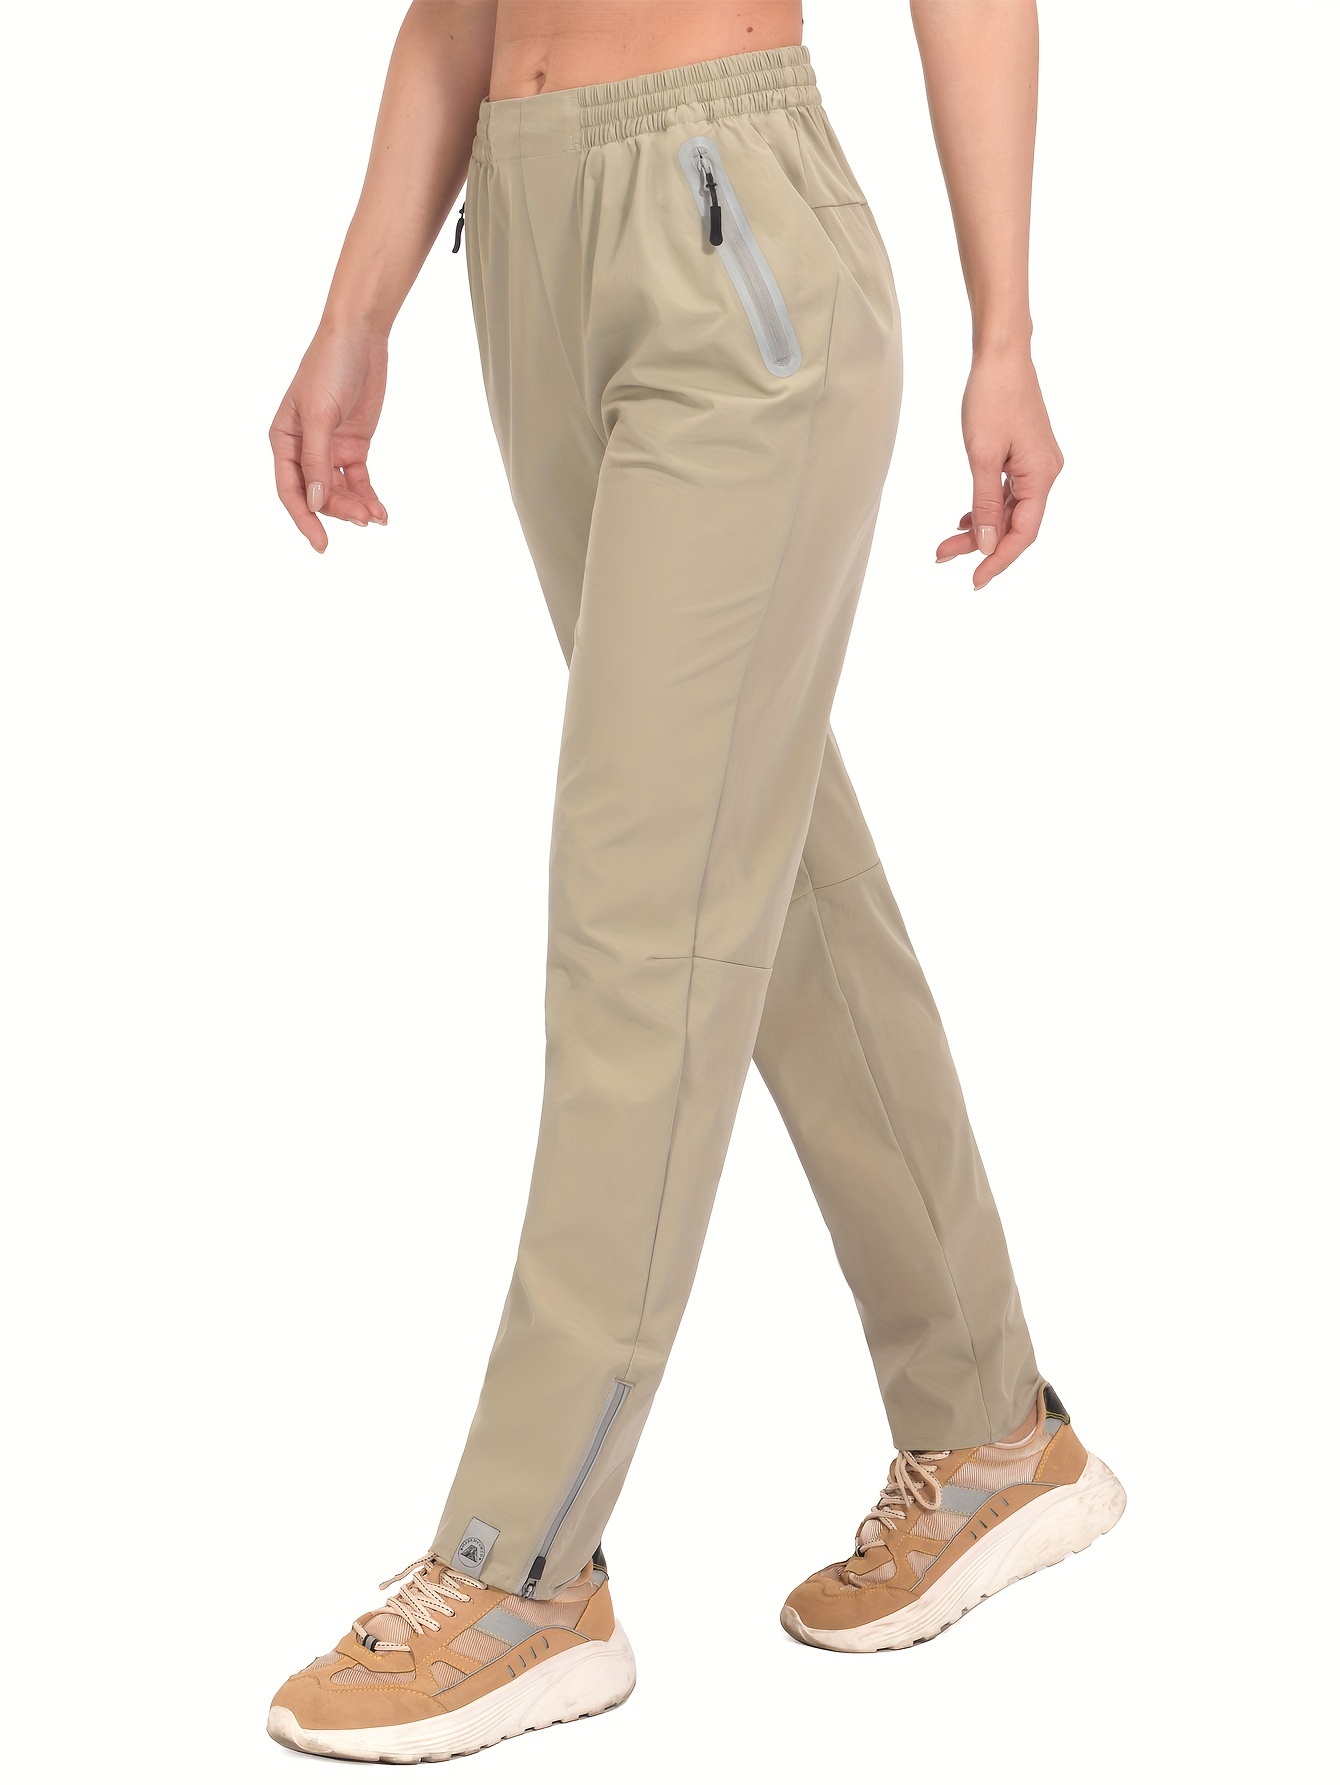 Womens Stretch Work Office Business Casual Slacks Solid Color